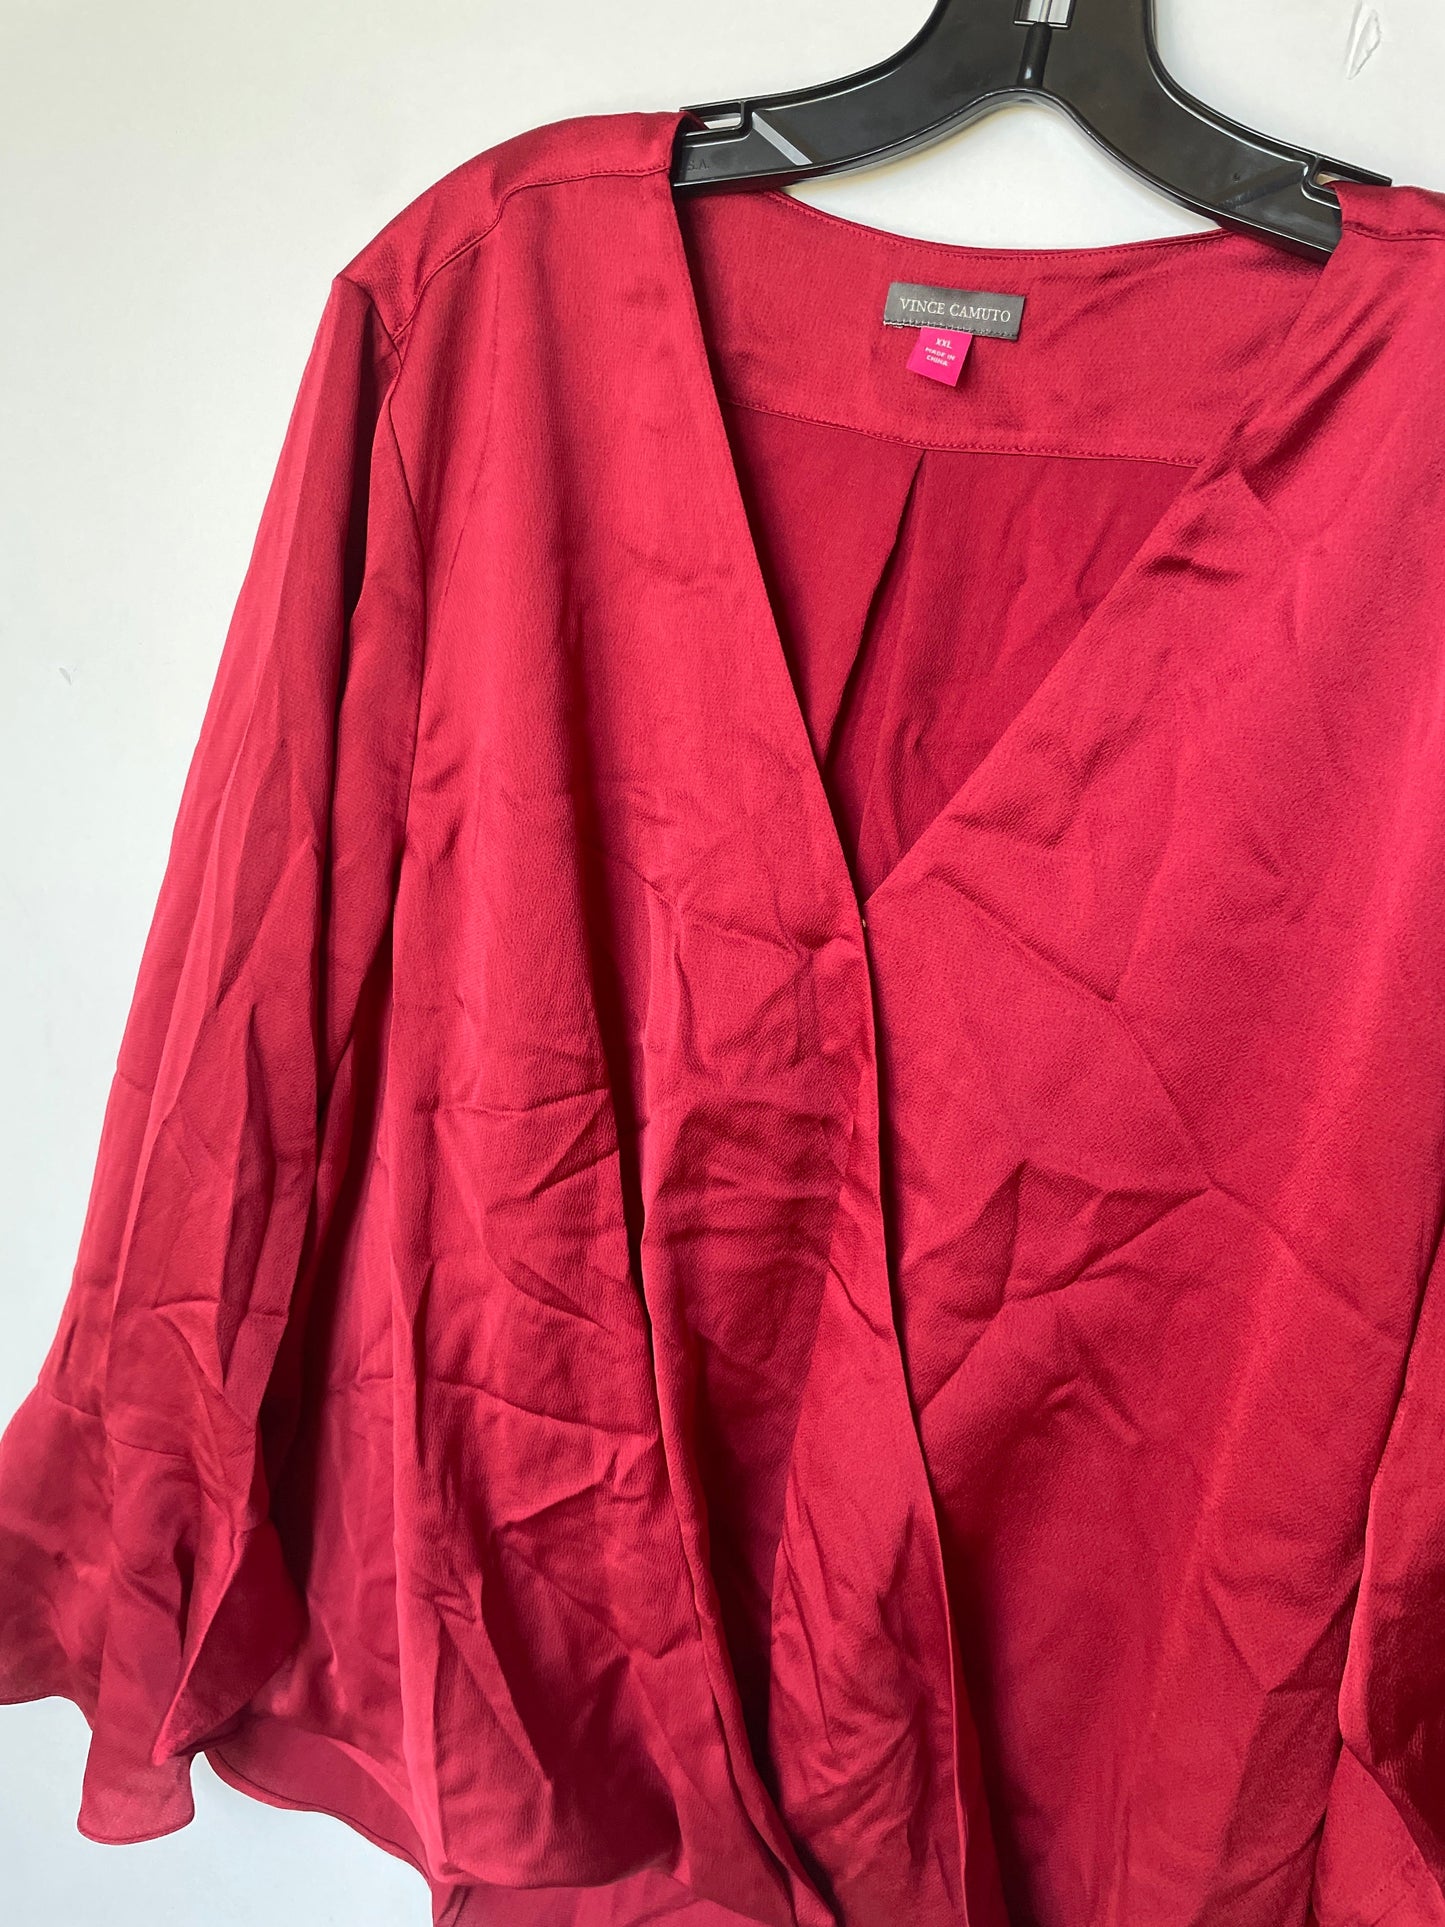 Red Top Long Sleeve Vince Camuto, Size Xxl